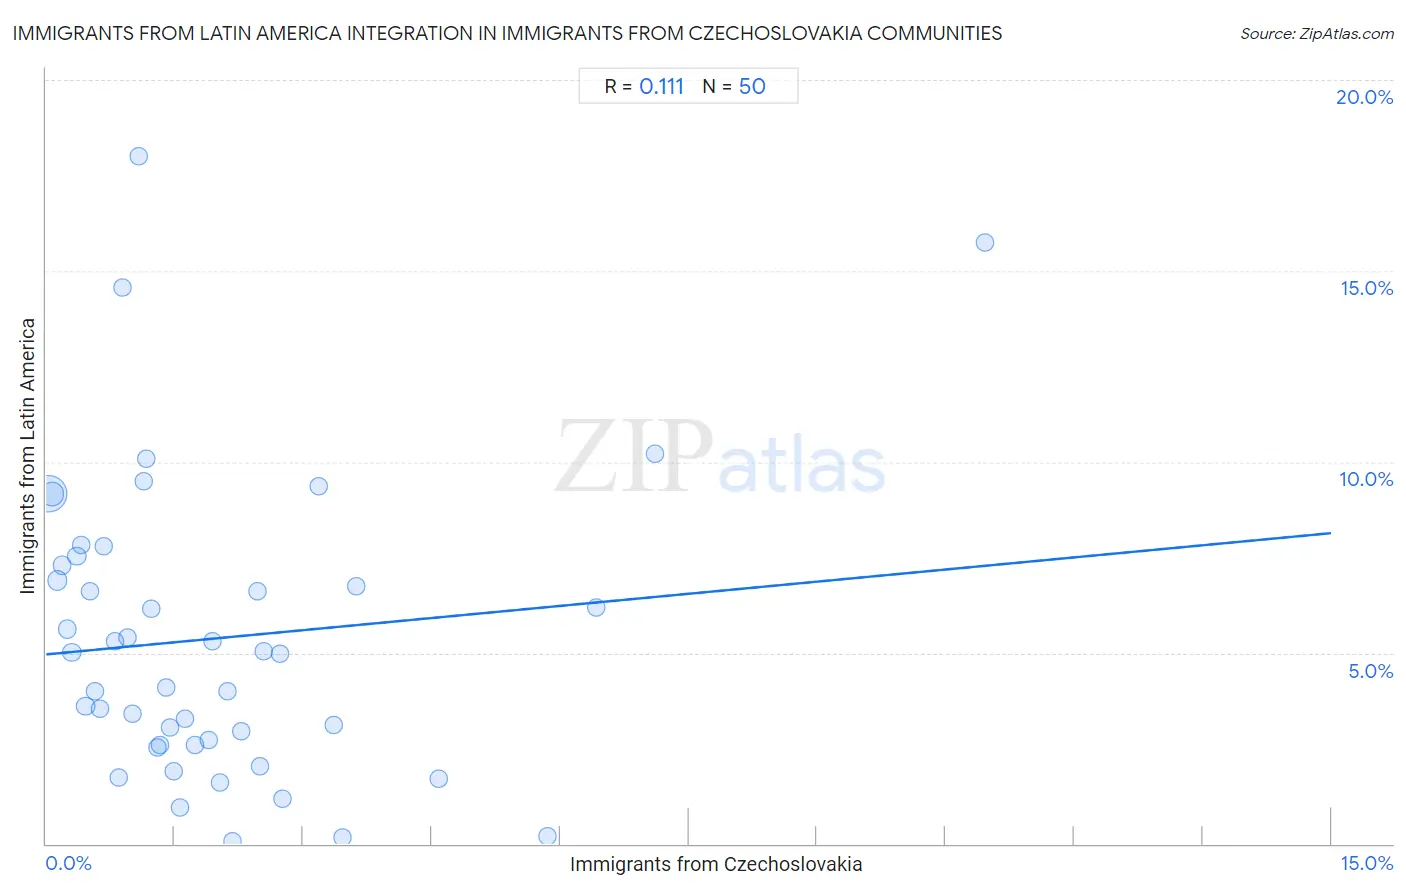 Immigrants from Czechoslovakia Integration in Immigrants from Latin America Communities